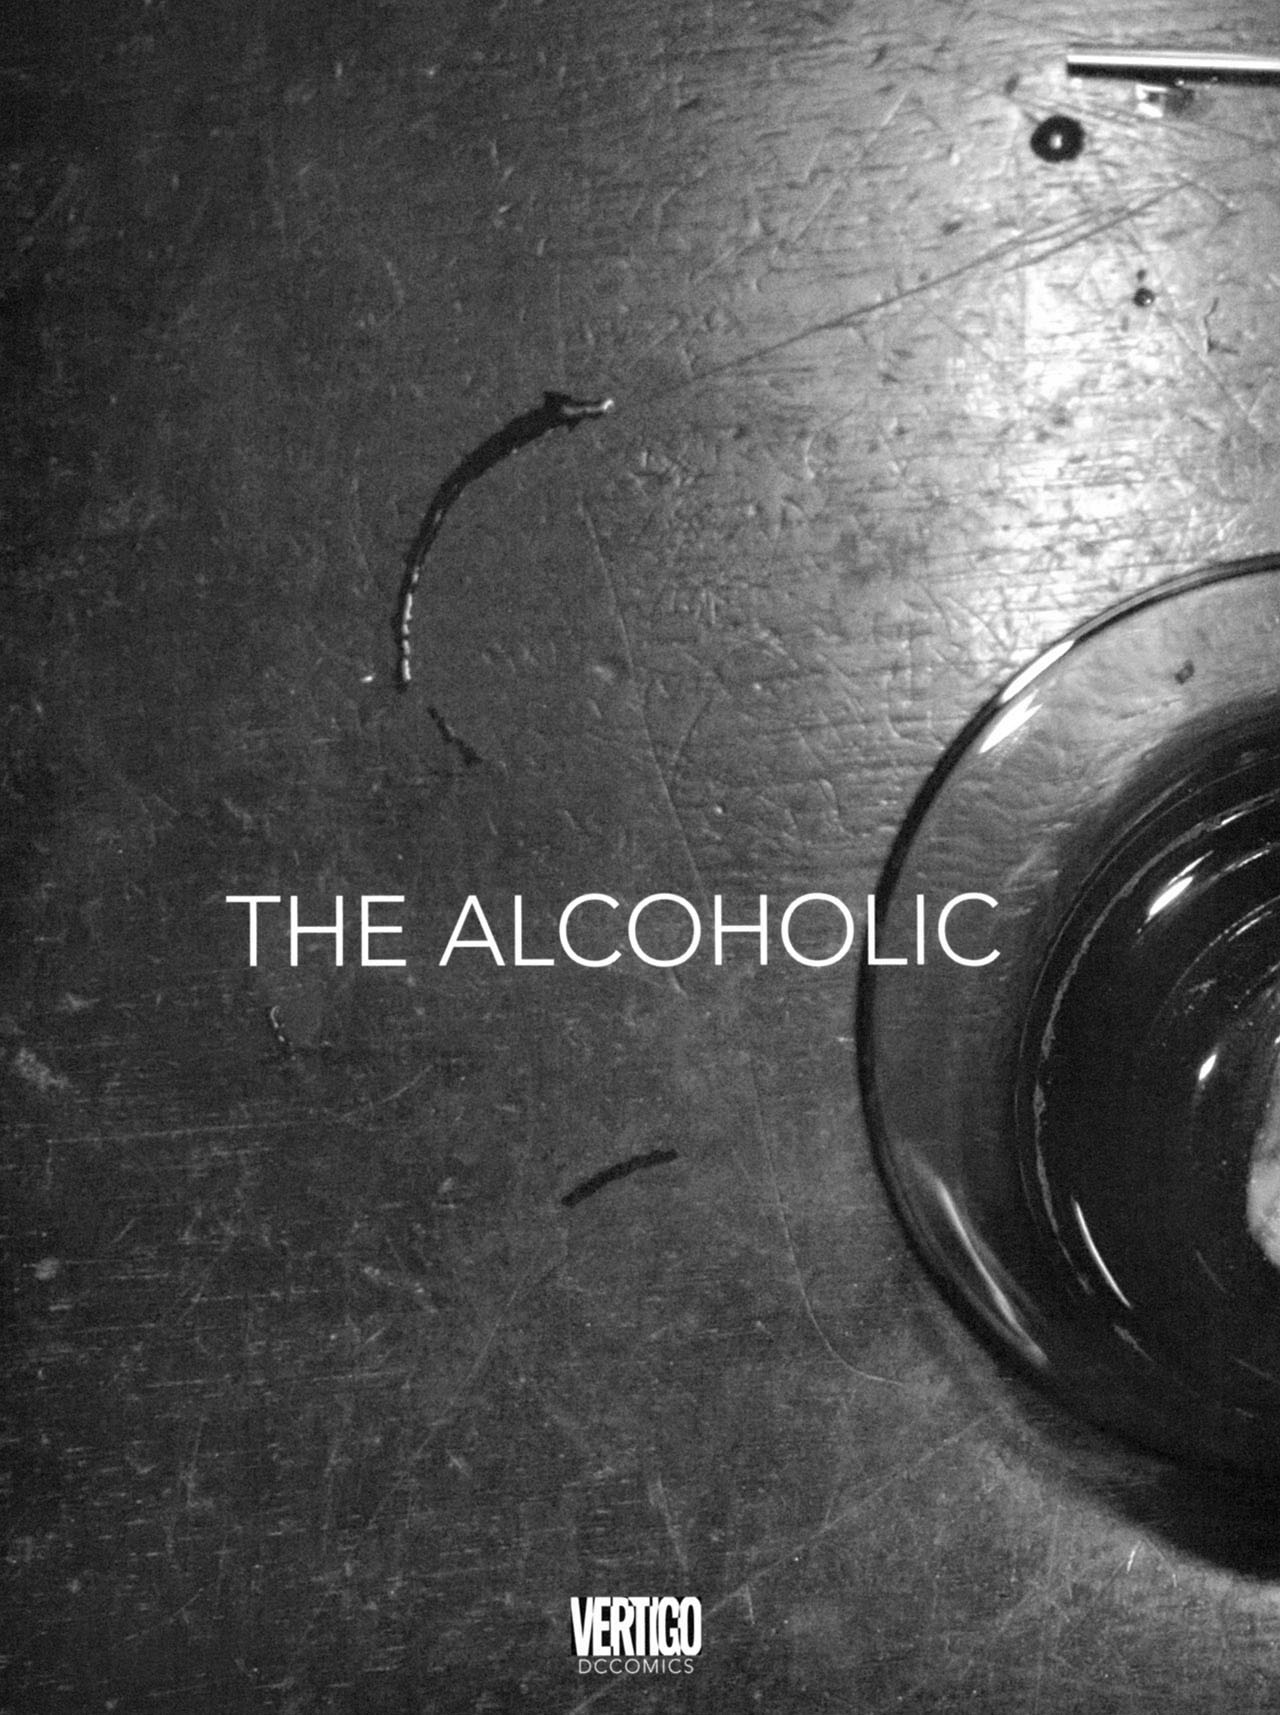 Read online The Alcoholic comic -  Issue # TPB - 4